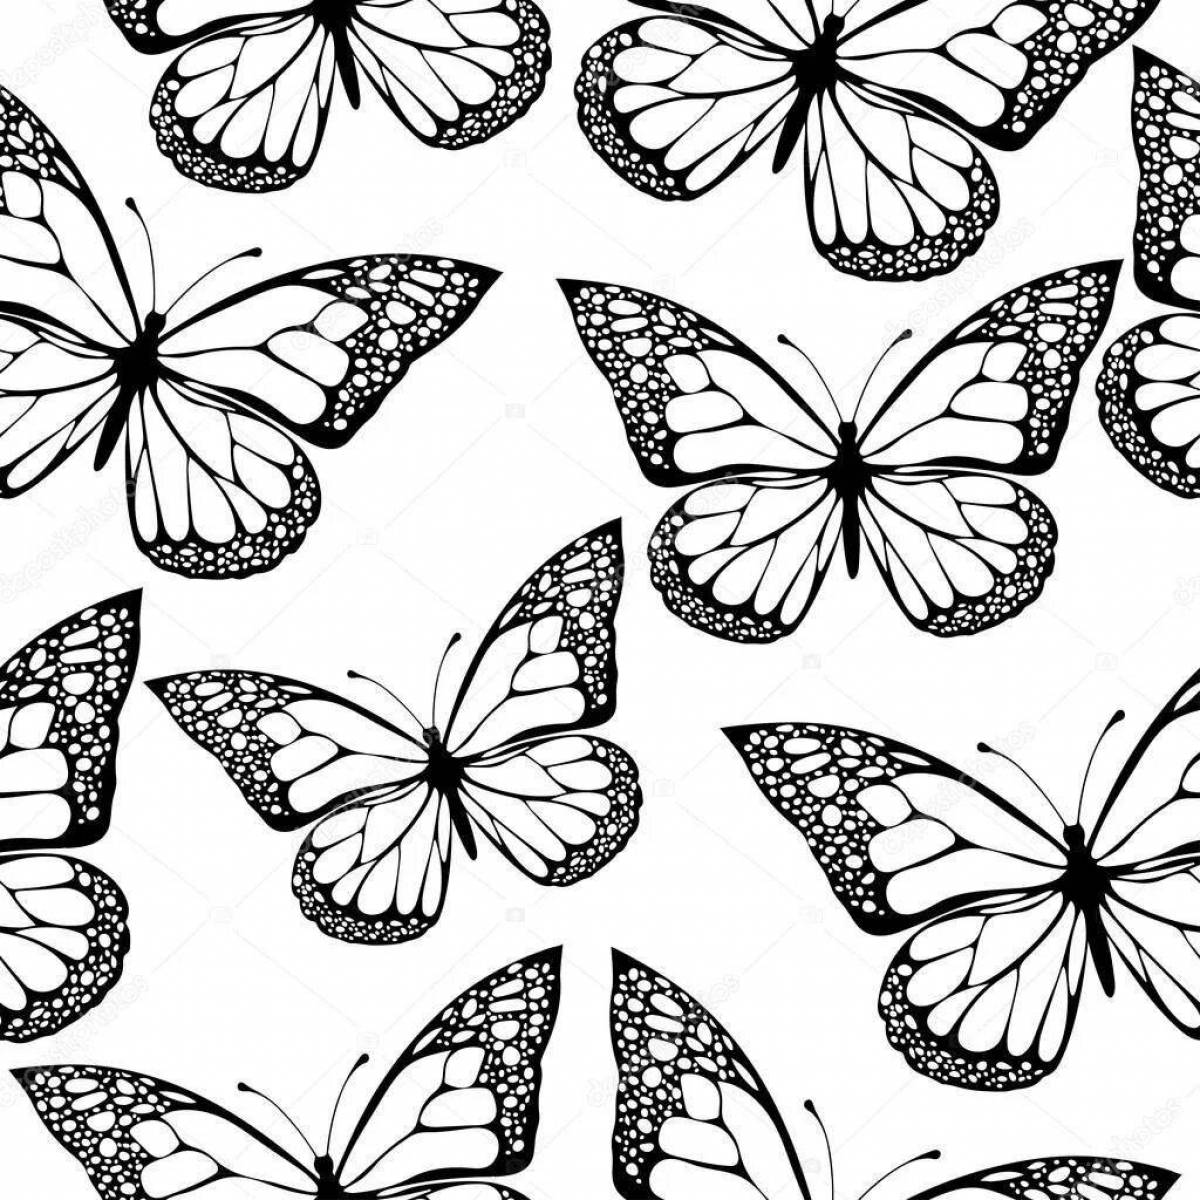 Coloring book exuberant black and white butterflies